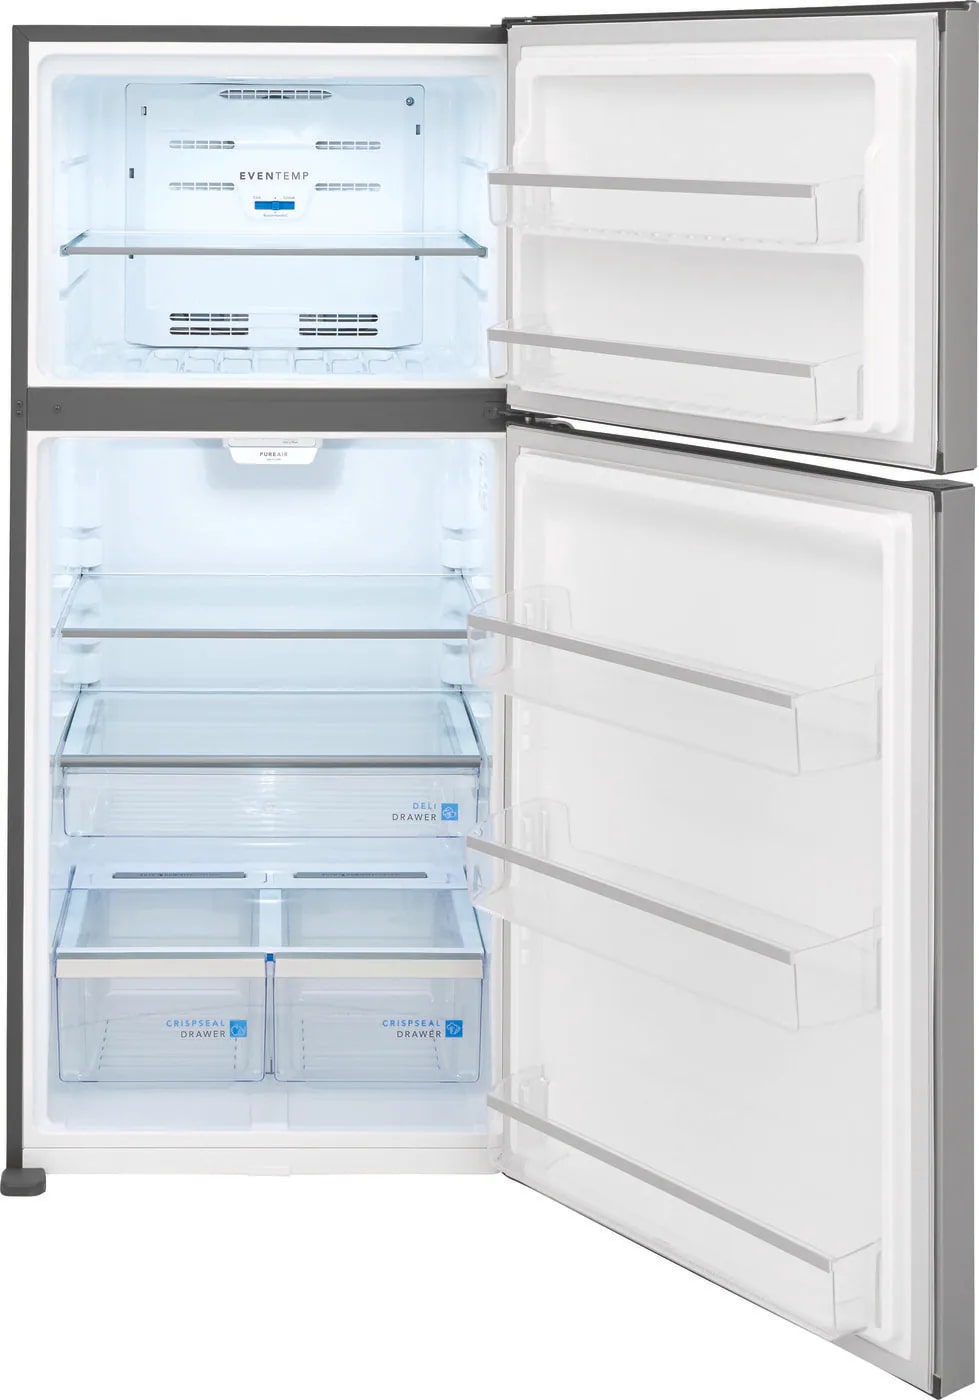 Frigidaire Gallery - 30 Inch 20 cu. ft Top Mount Refrigerator in Stainless - FGHT2055VF